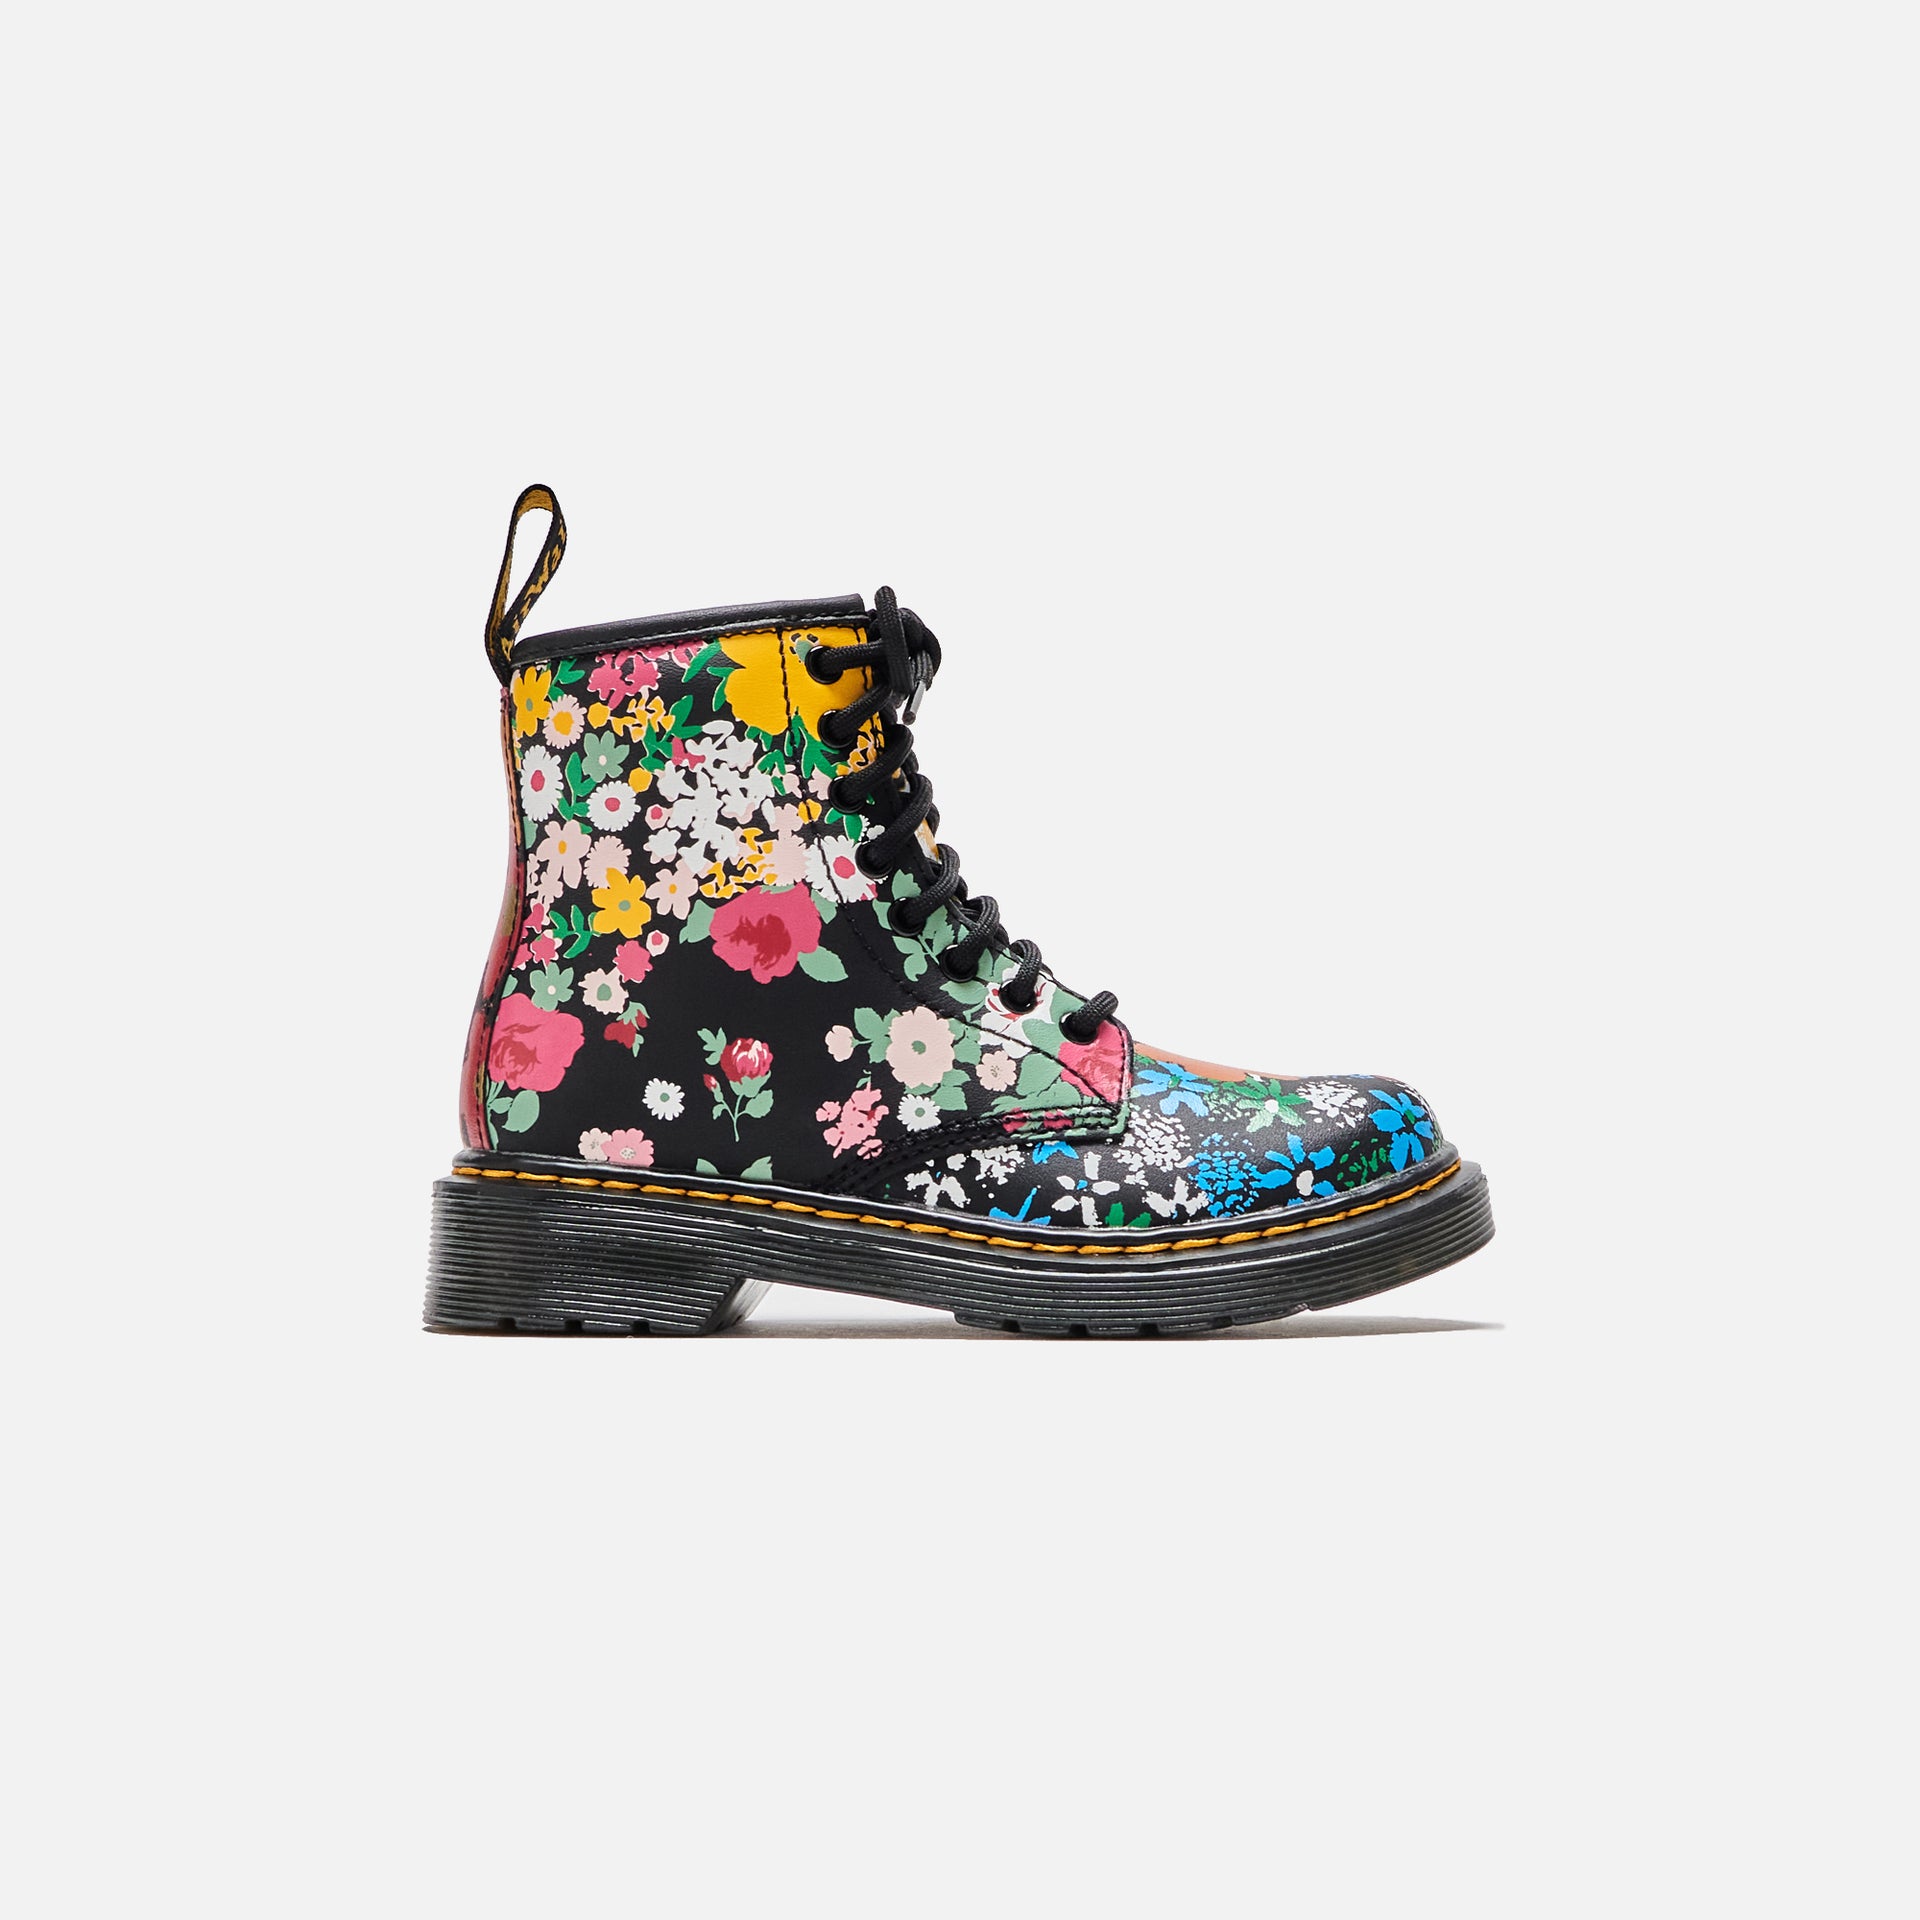 Dr. Martens 1460 Junior Hydro Floral - Black / Yellow / White / Red